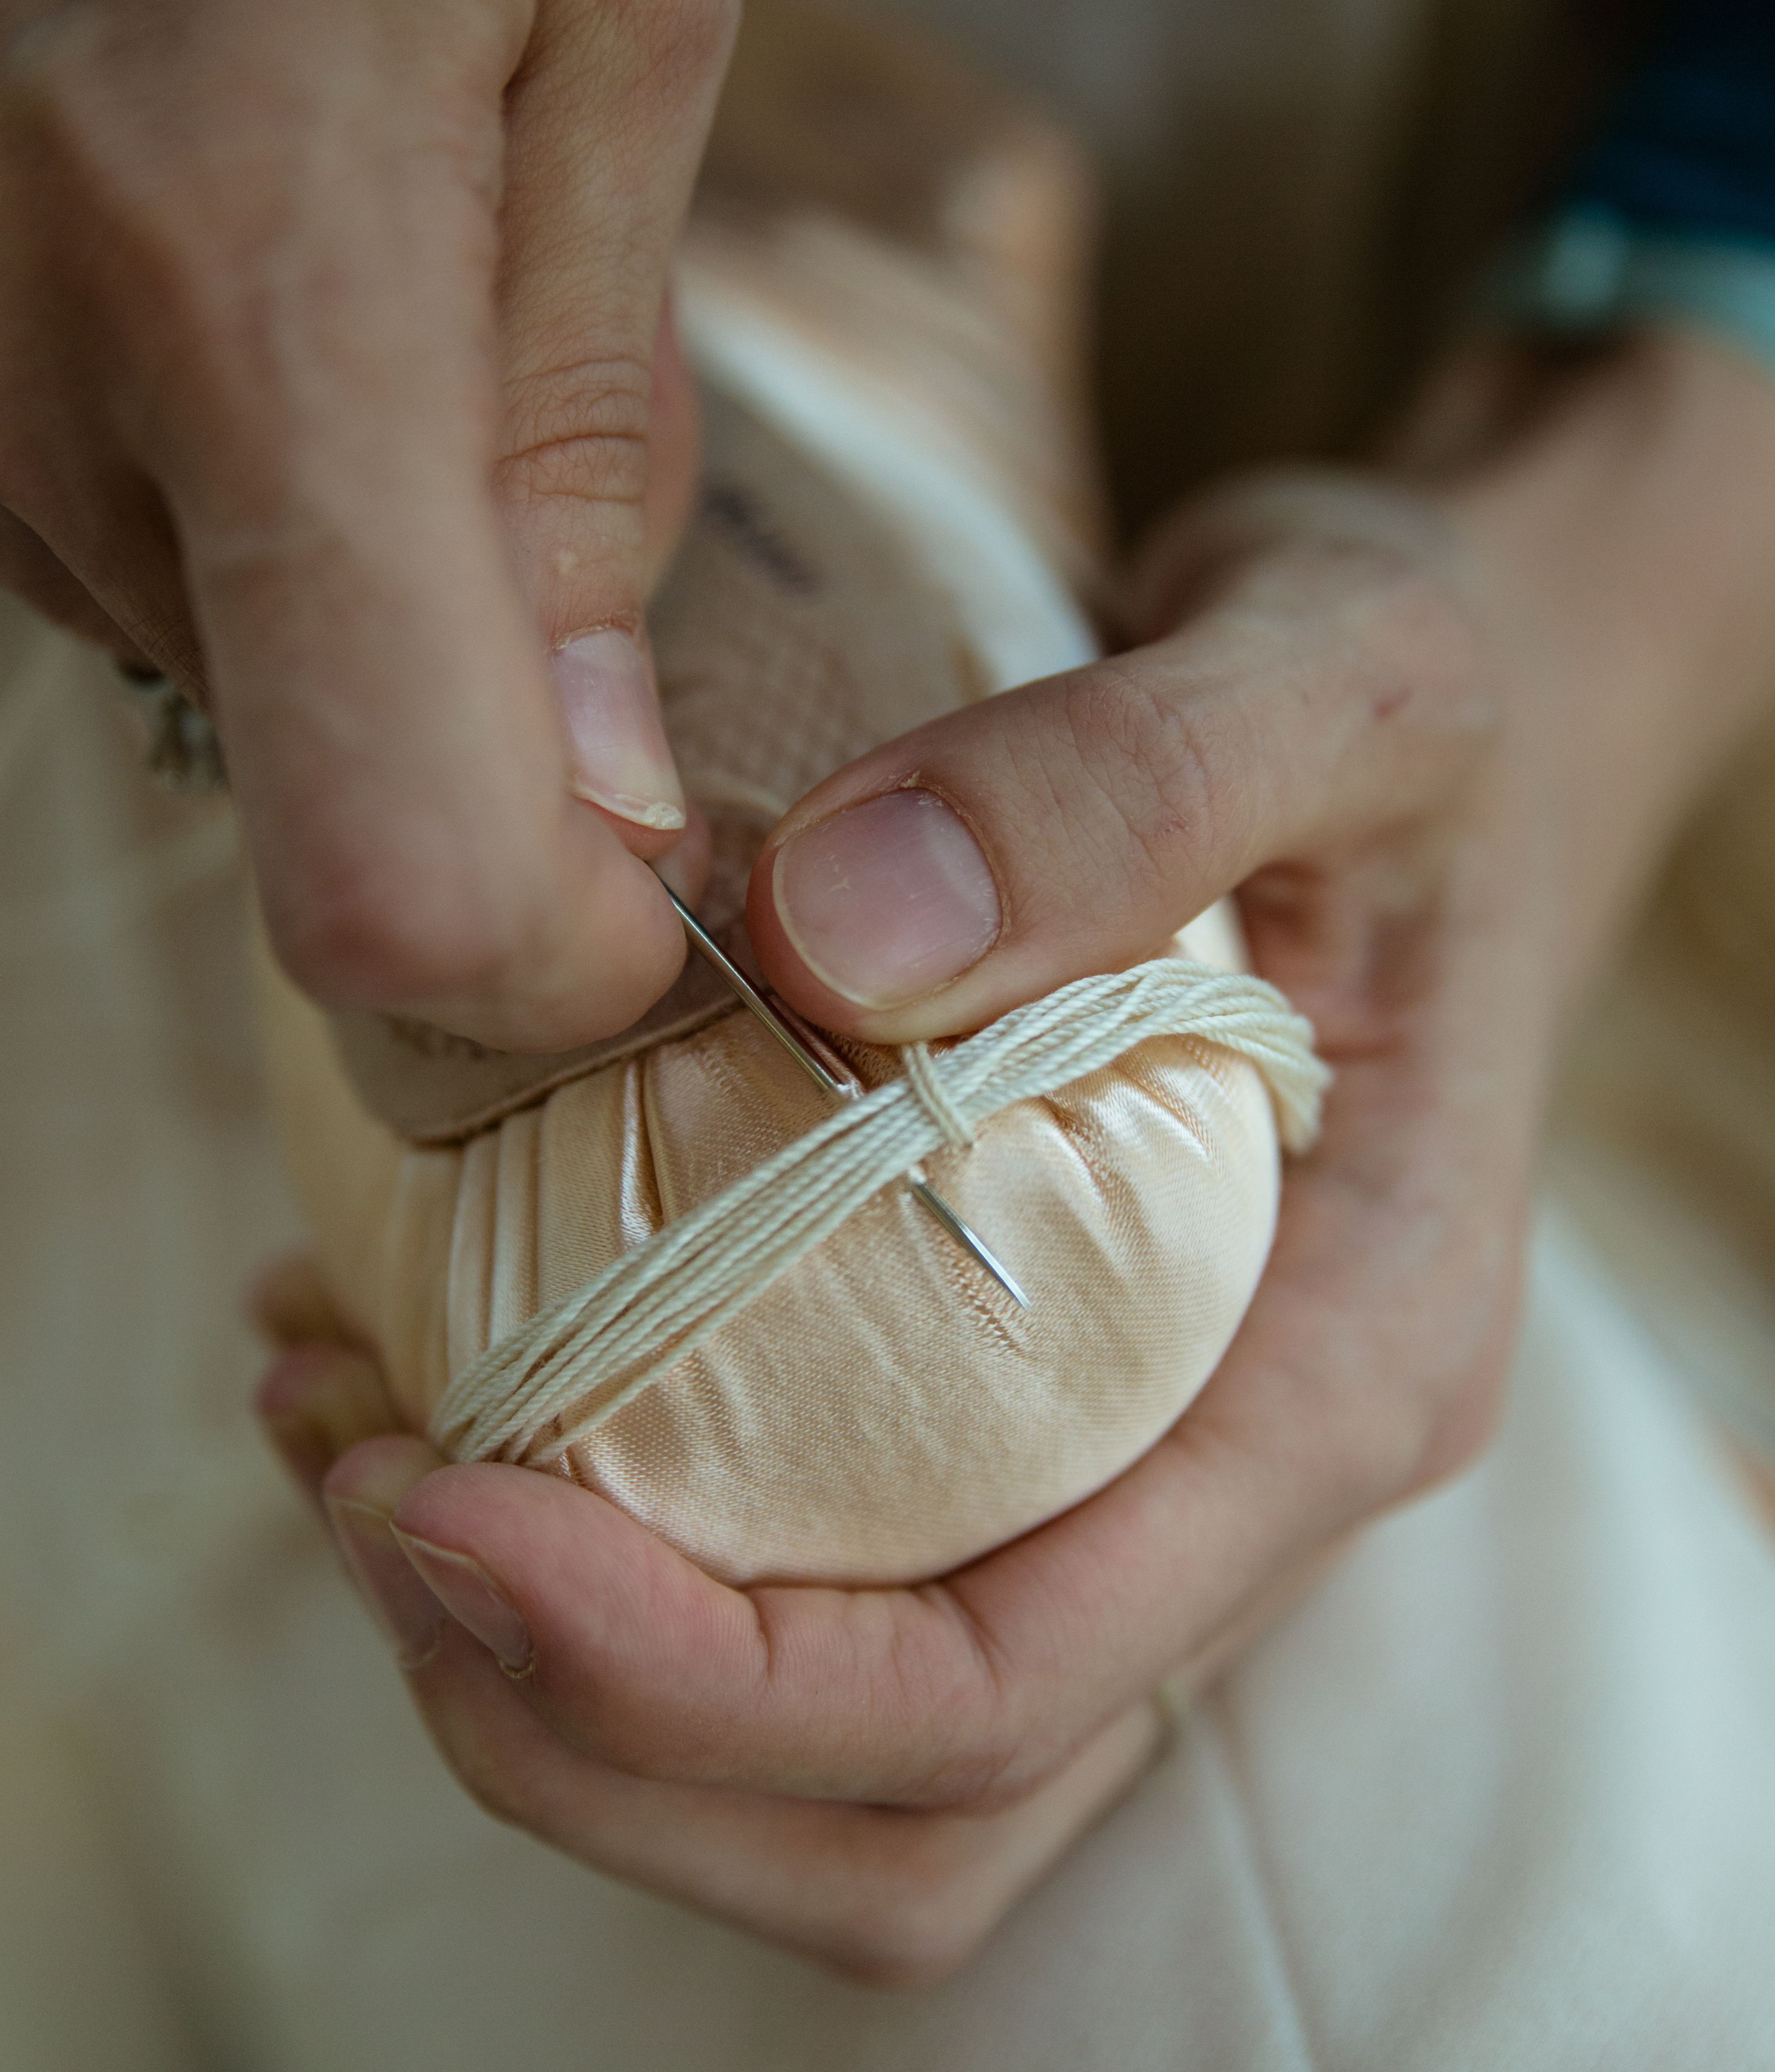 darning pointe shoes